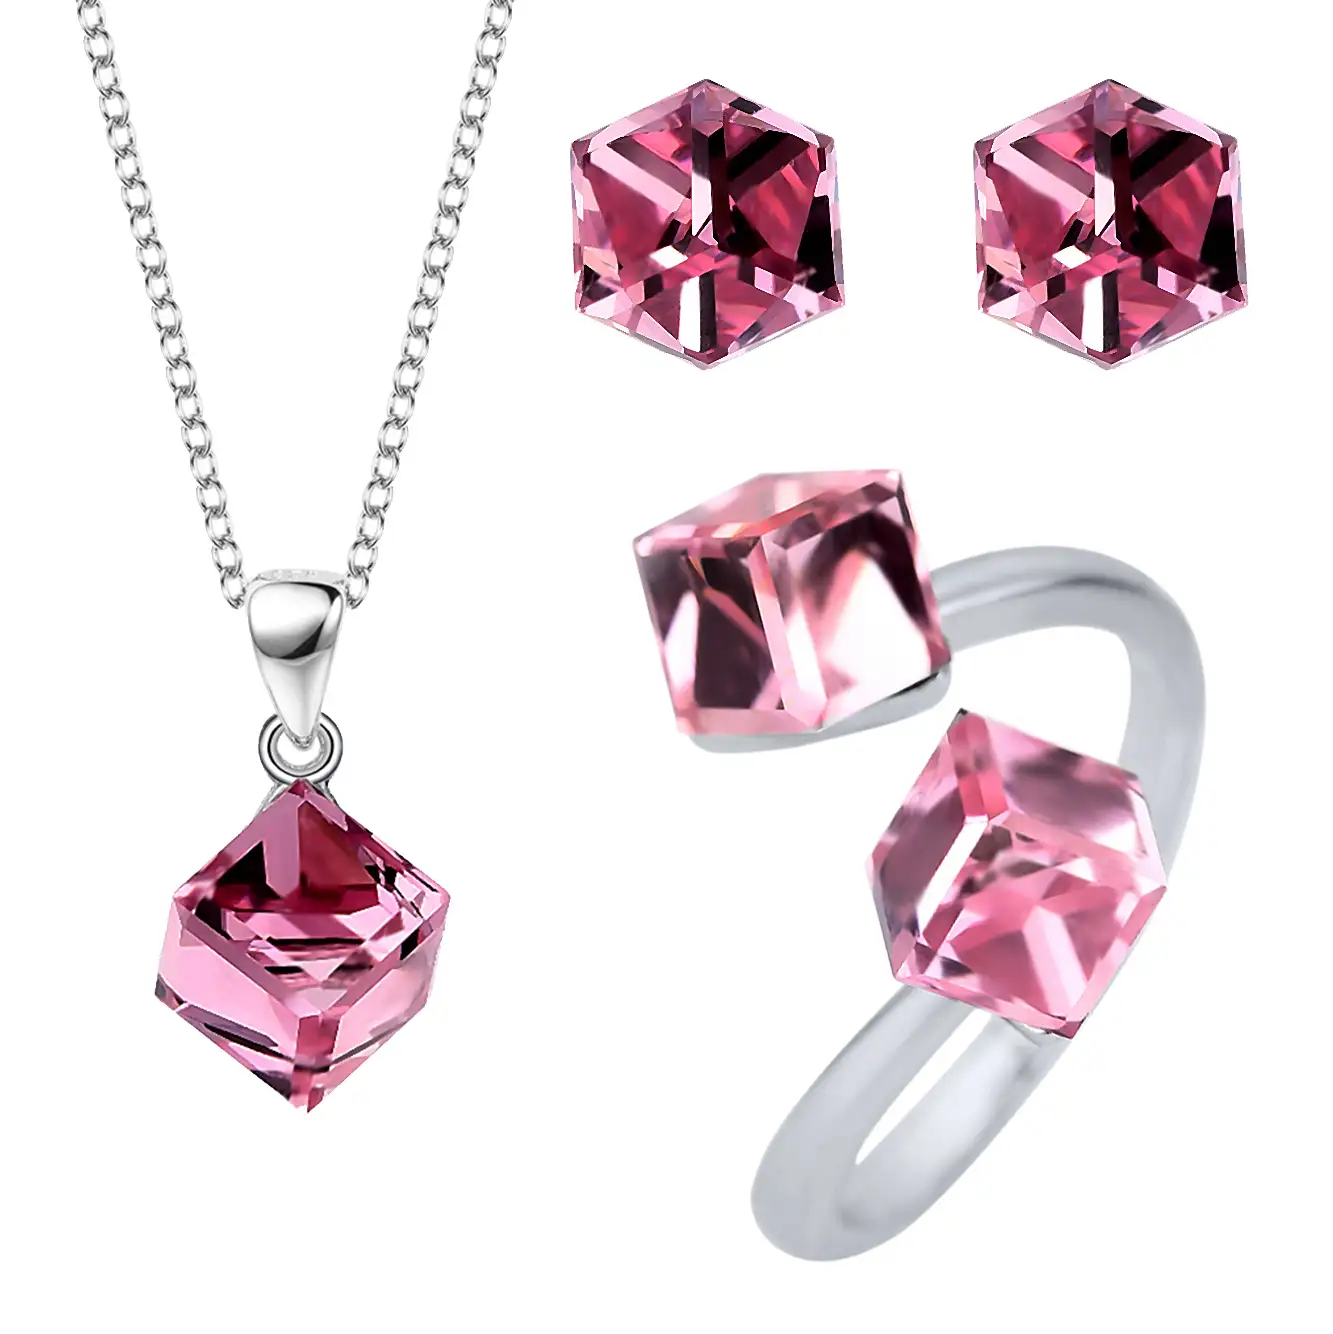 Crystals from Swarovski Cube Pendant Necklace Stud Earring Ring Set 140300004